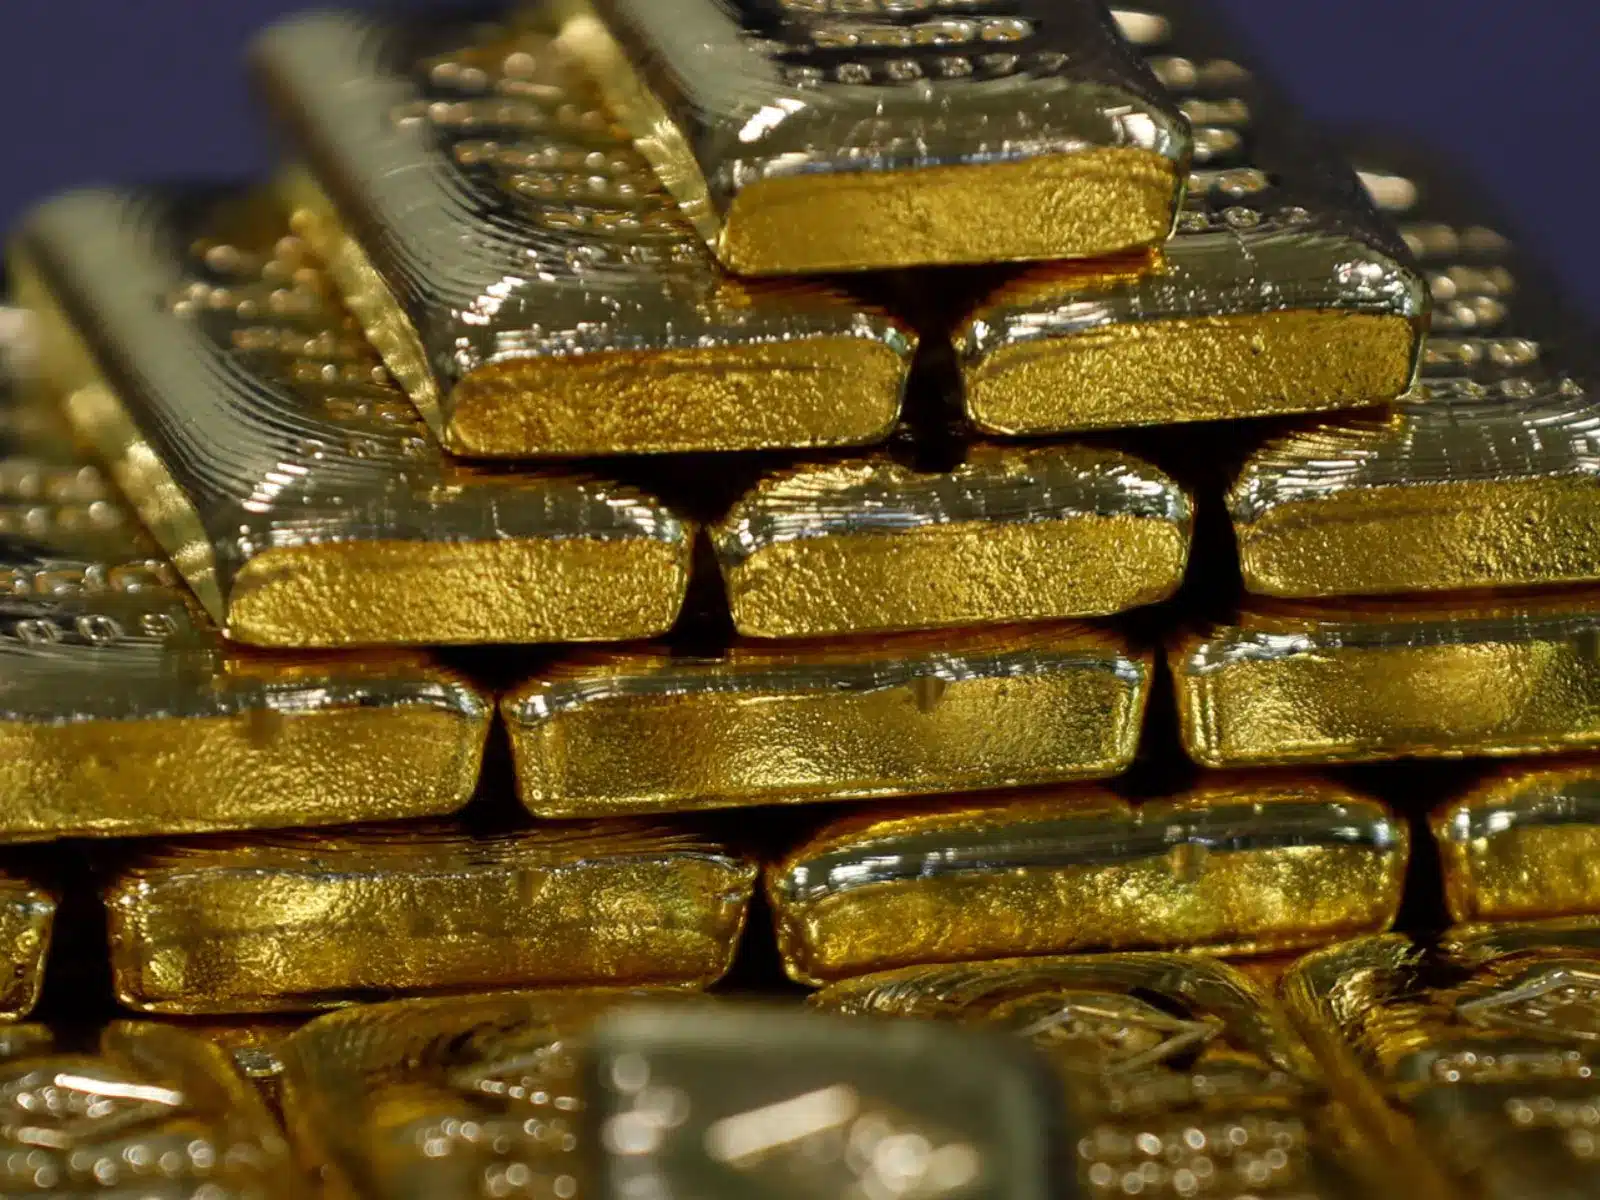 Import Restrictions Imposed on Gold - Asiana Times